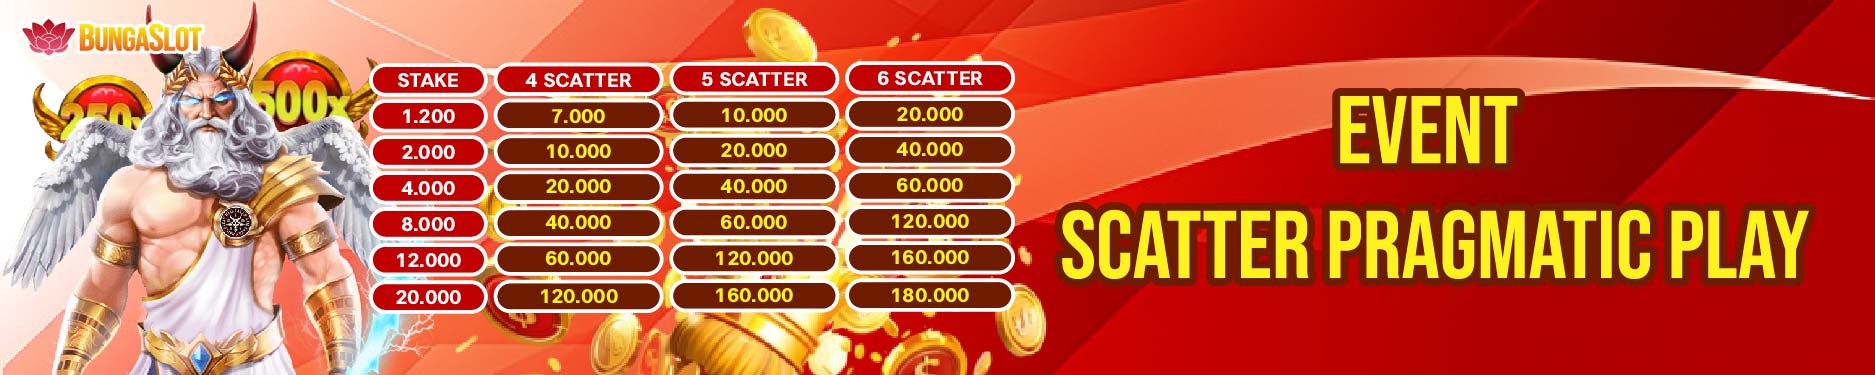 EVENT SCATTER PRAGMATIC PLAY